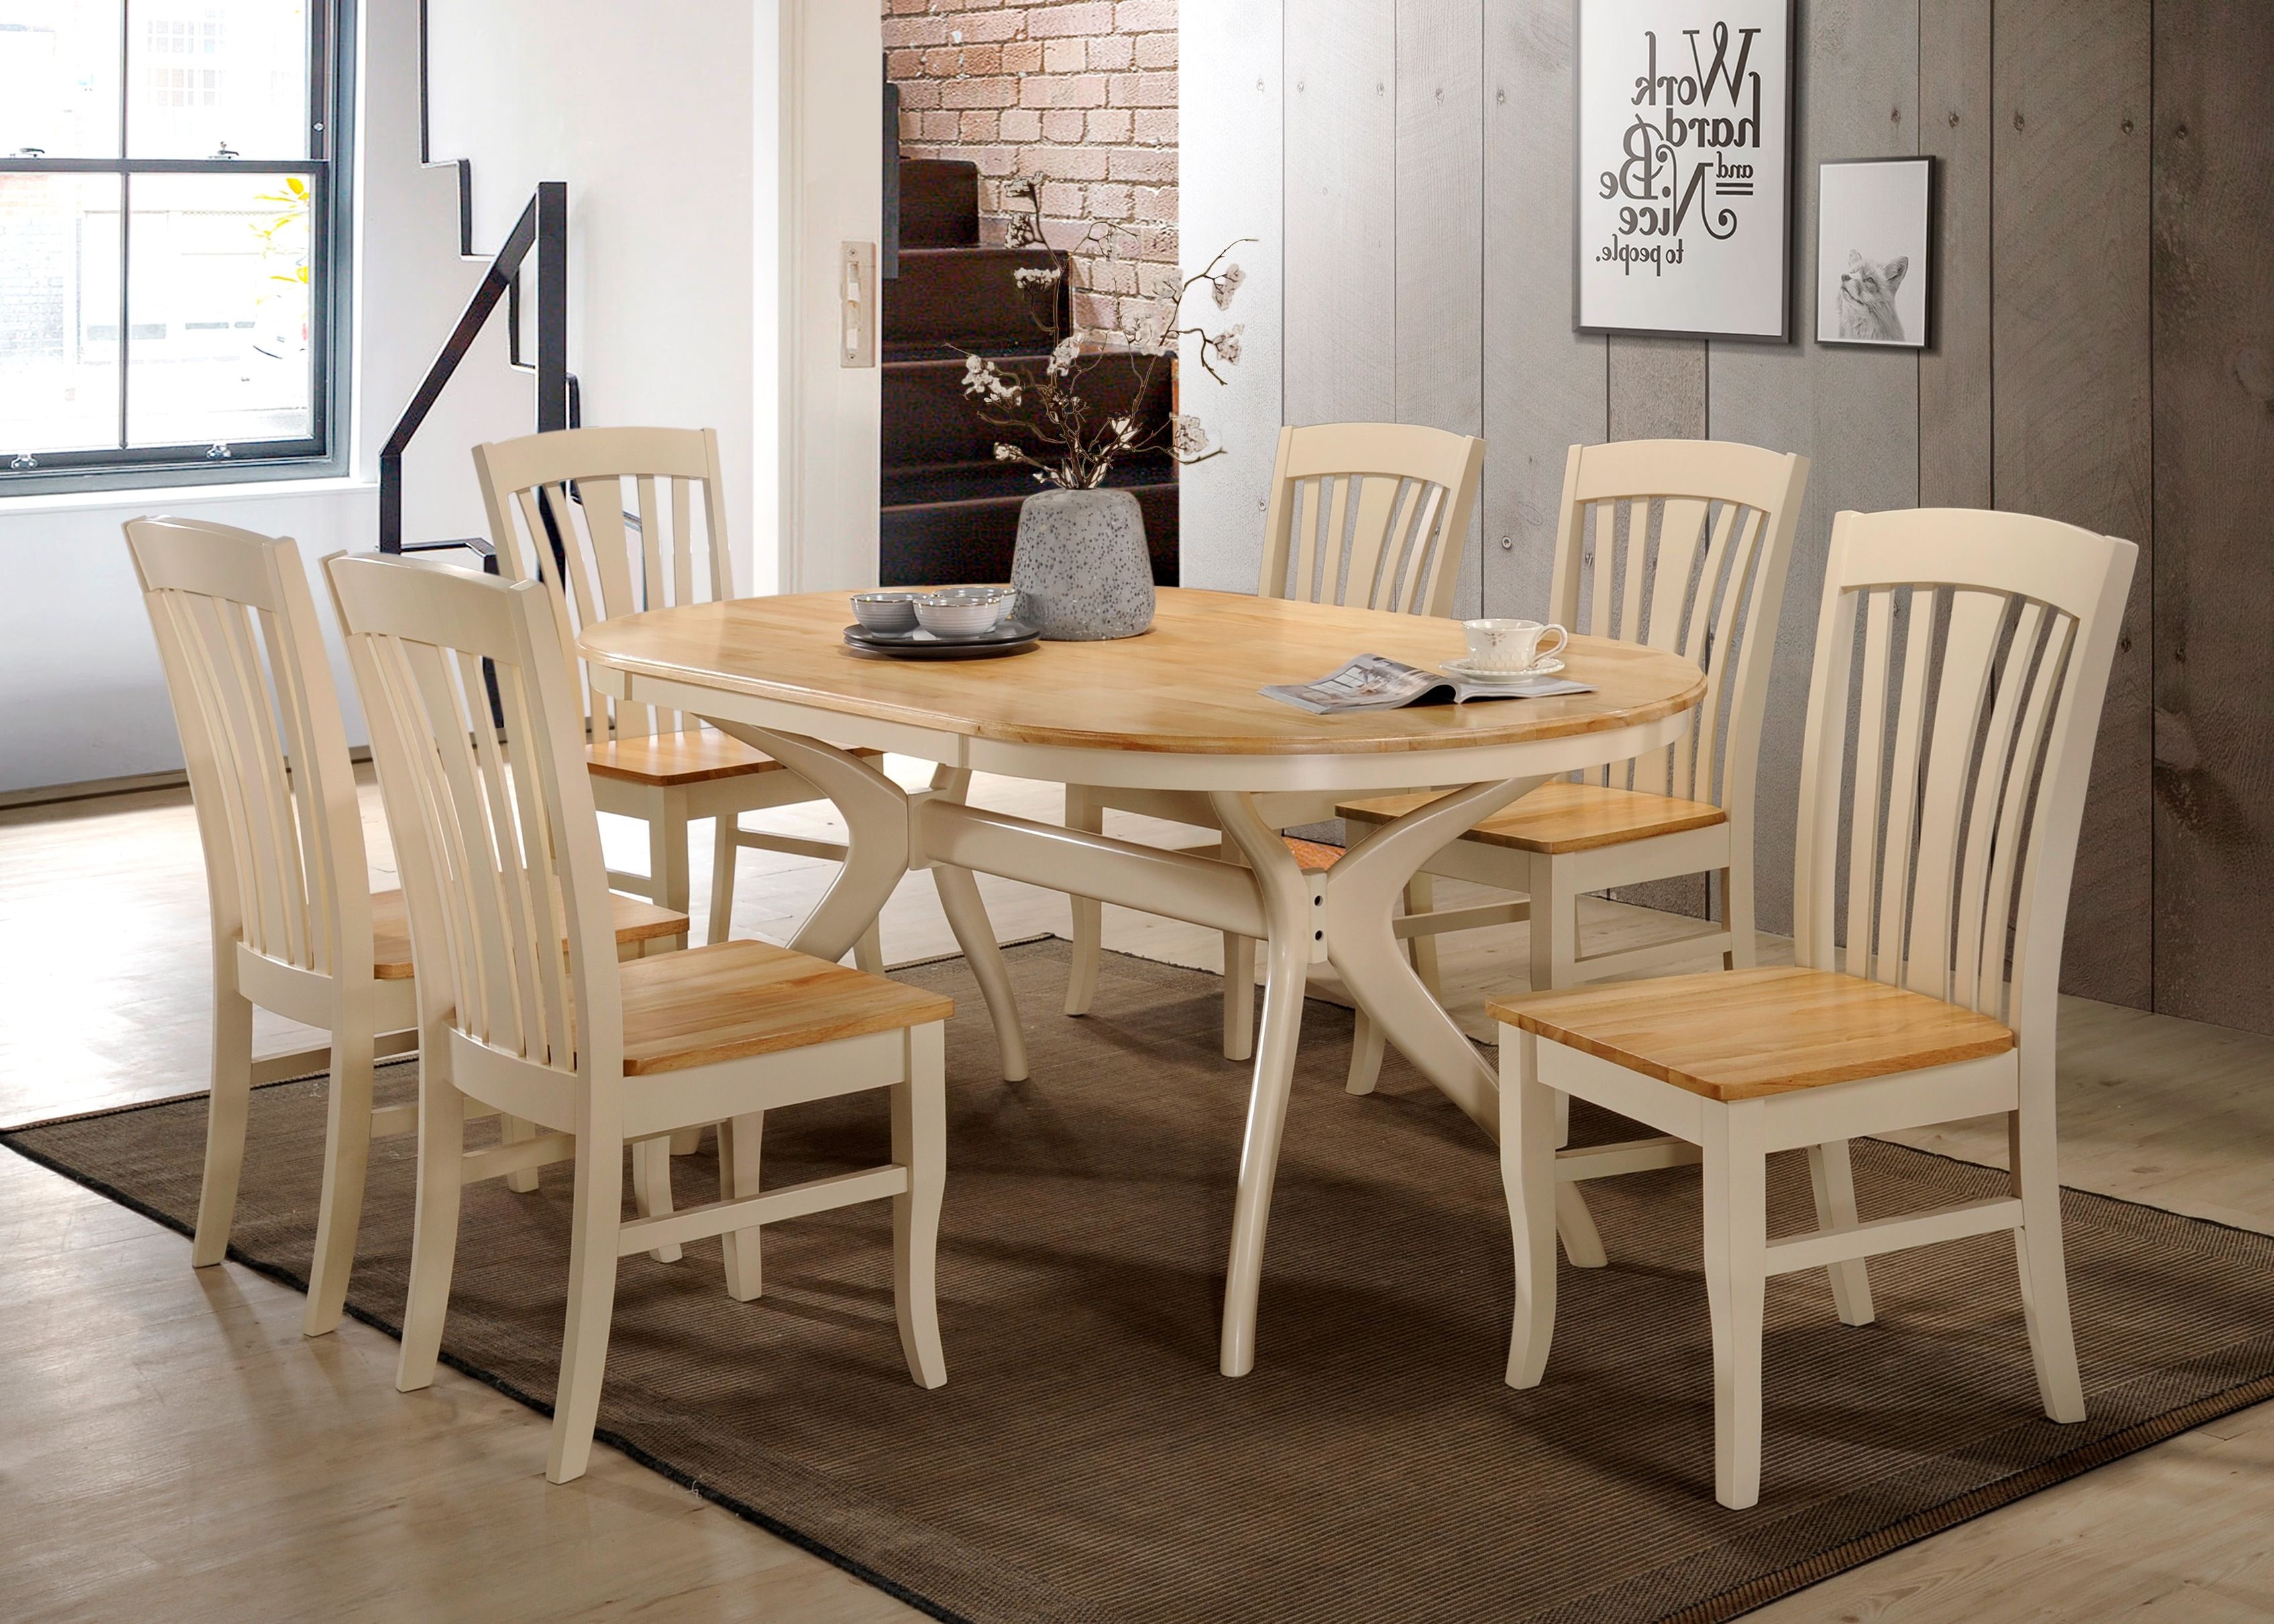 Brittany Dining Tables With Widely Used Oval Dining Table & 6 Chairs – Cream/oak Brittany (View 5 of 25)